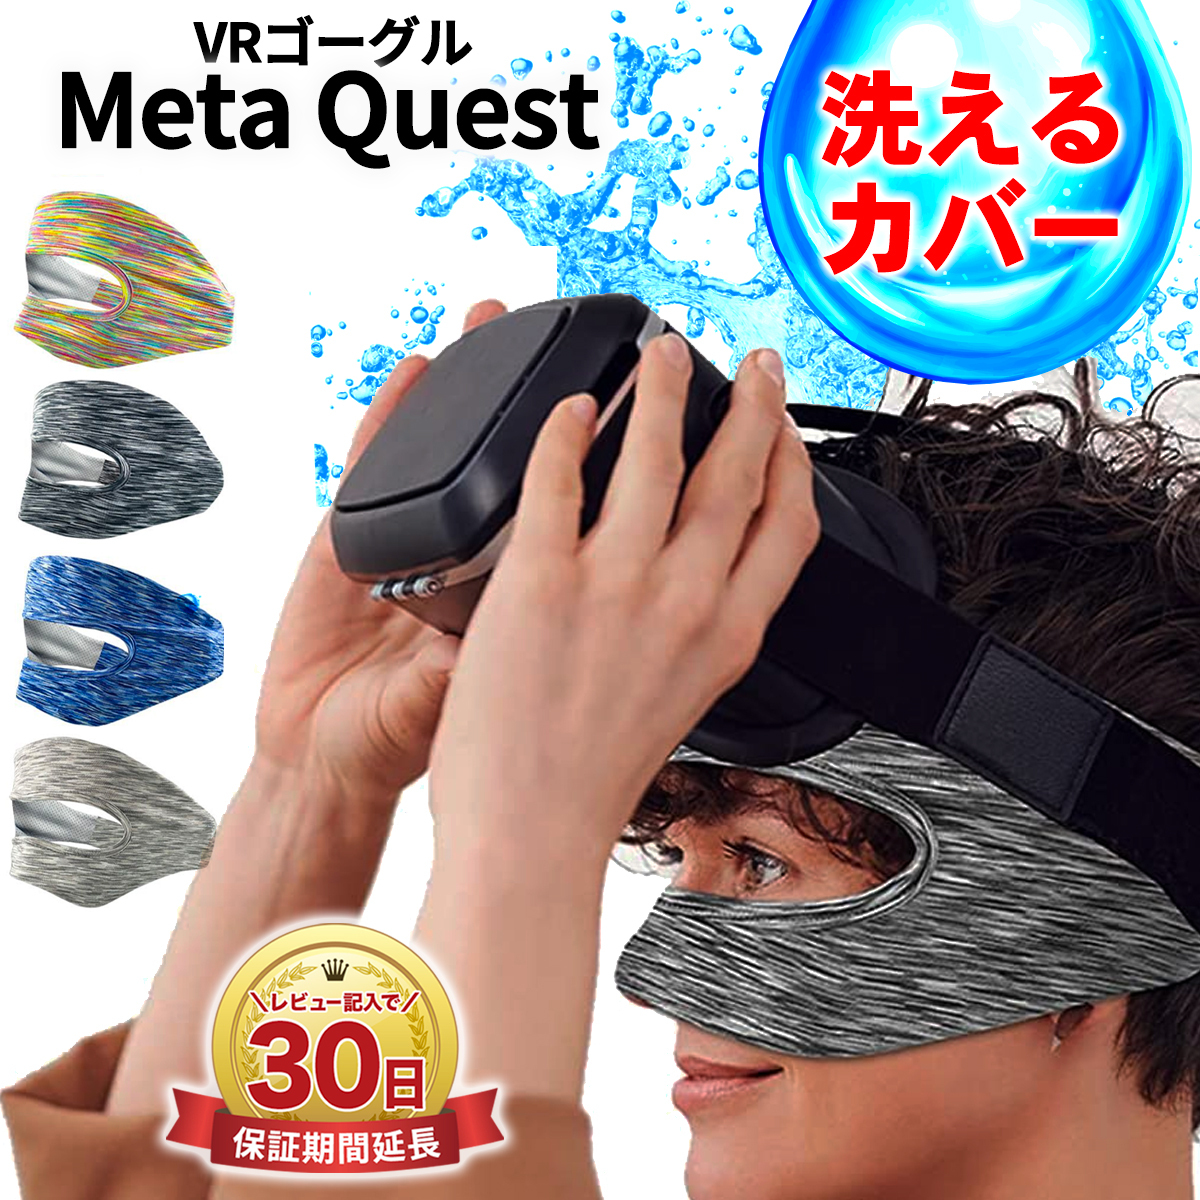  cover oq1 2 sweat cloth dirt leather fat protection VR goggle . prevention accessory 128gb 256gb PlayStation VR2 Apple Vision Pro space computer 